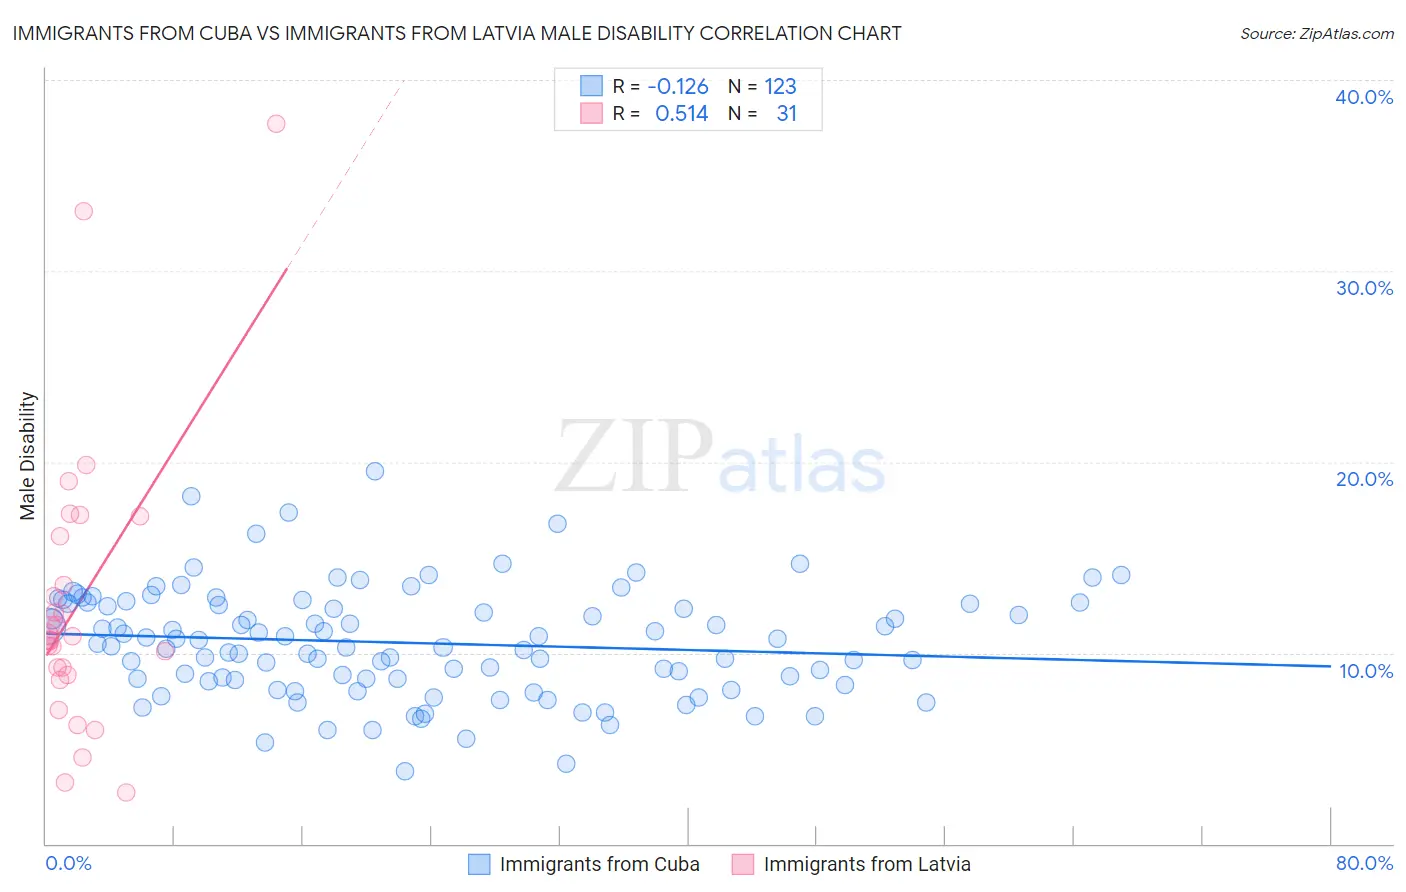 Immigrants from Cuba vs Immigrants from Latvia Male Disability